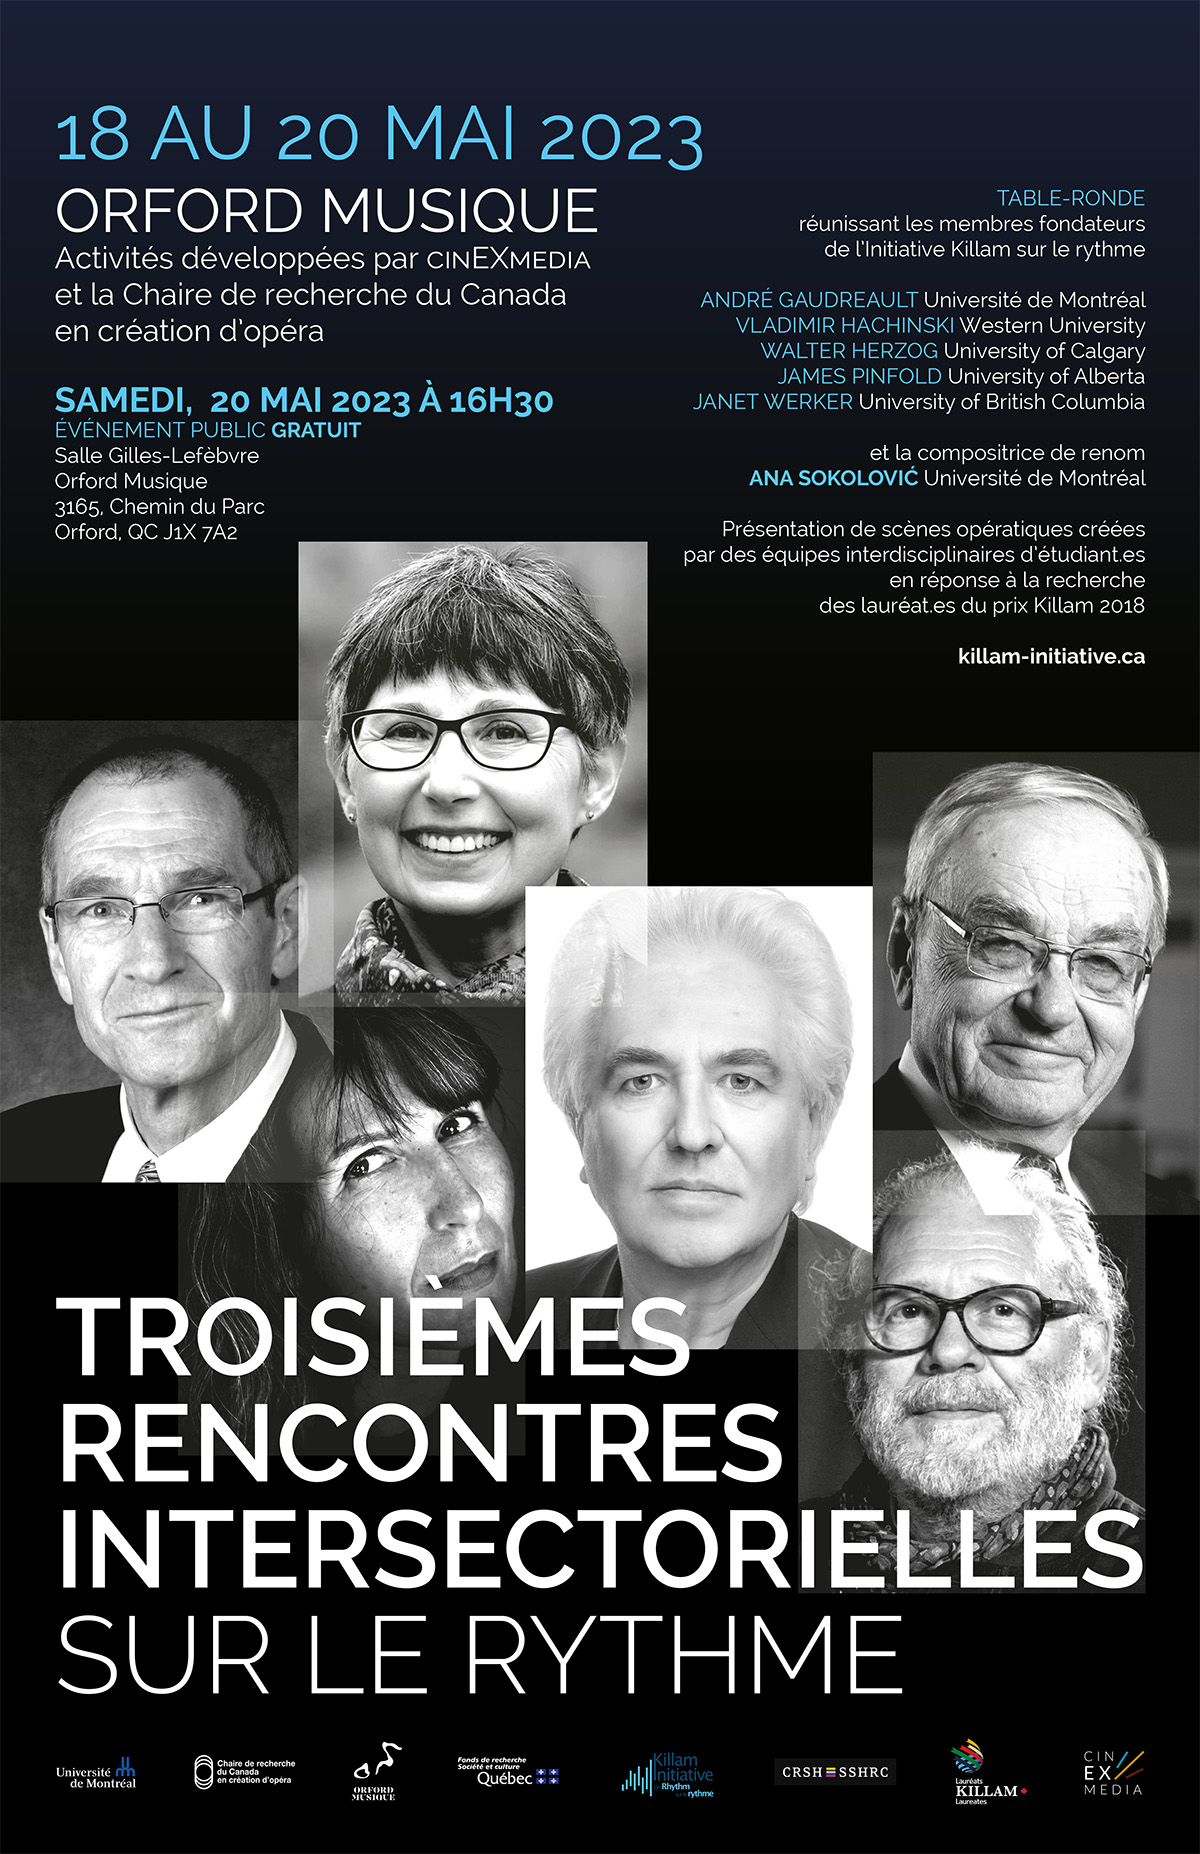 You are currently viewing May 20th event at Orford Musique : "Third intersectorial meeting on rhythm"